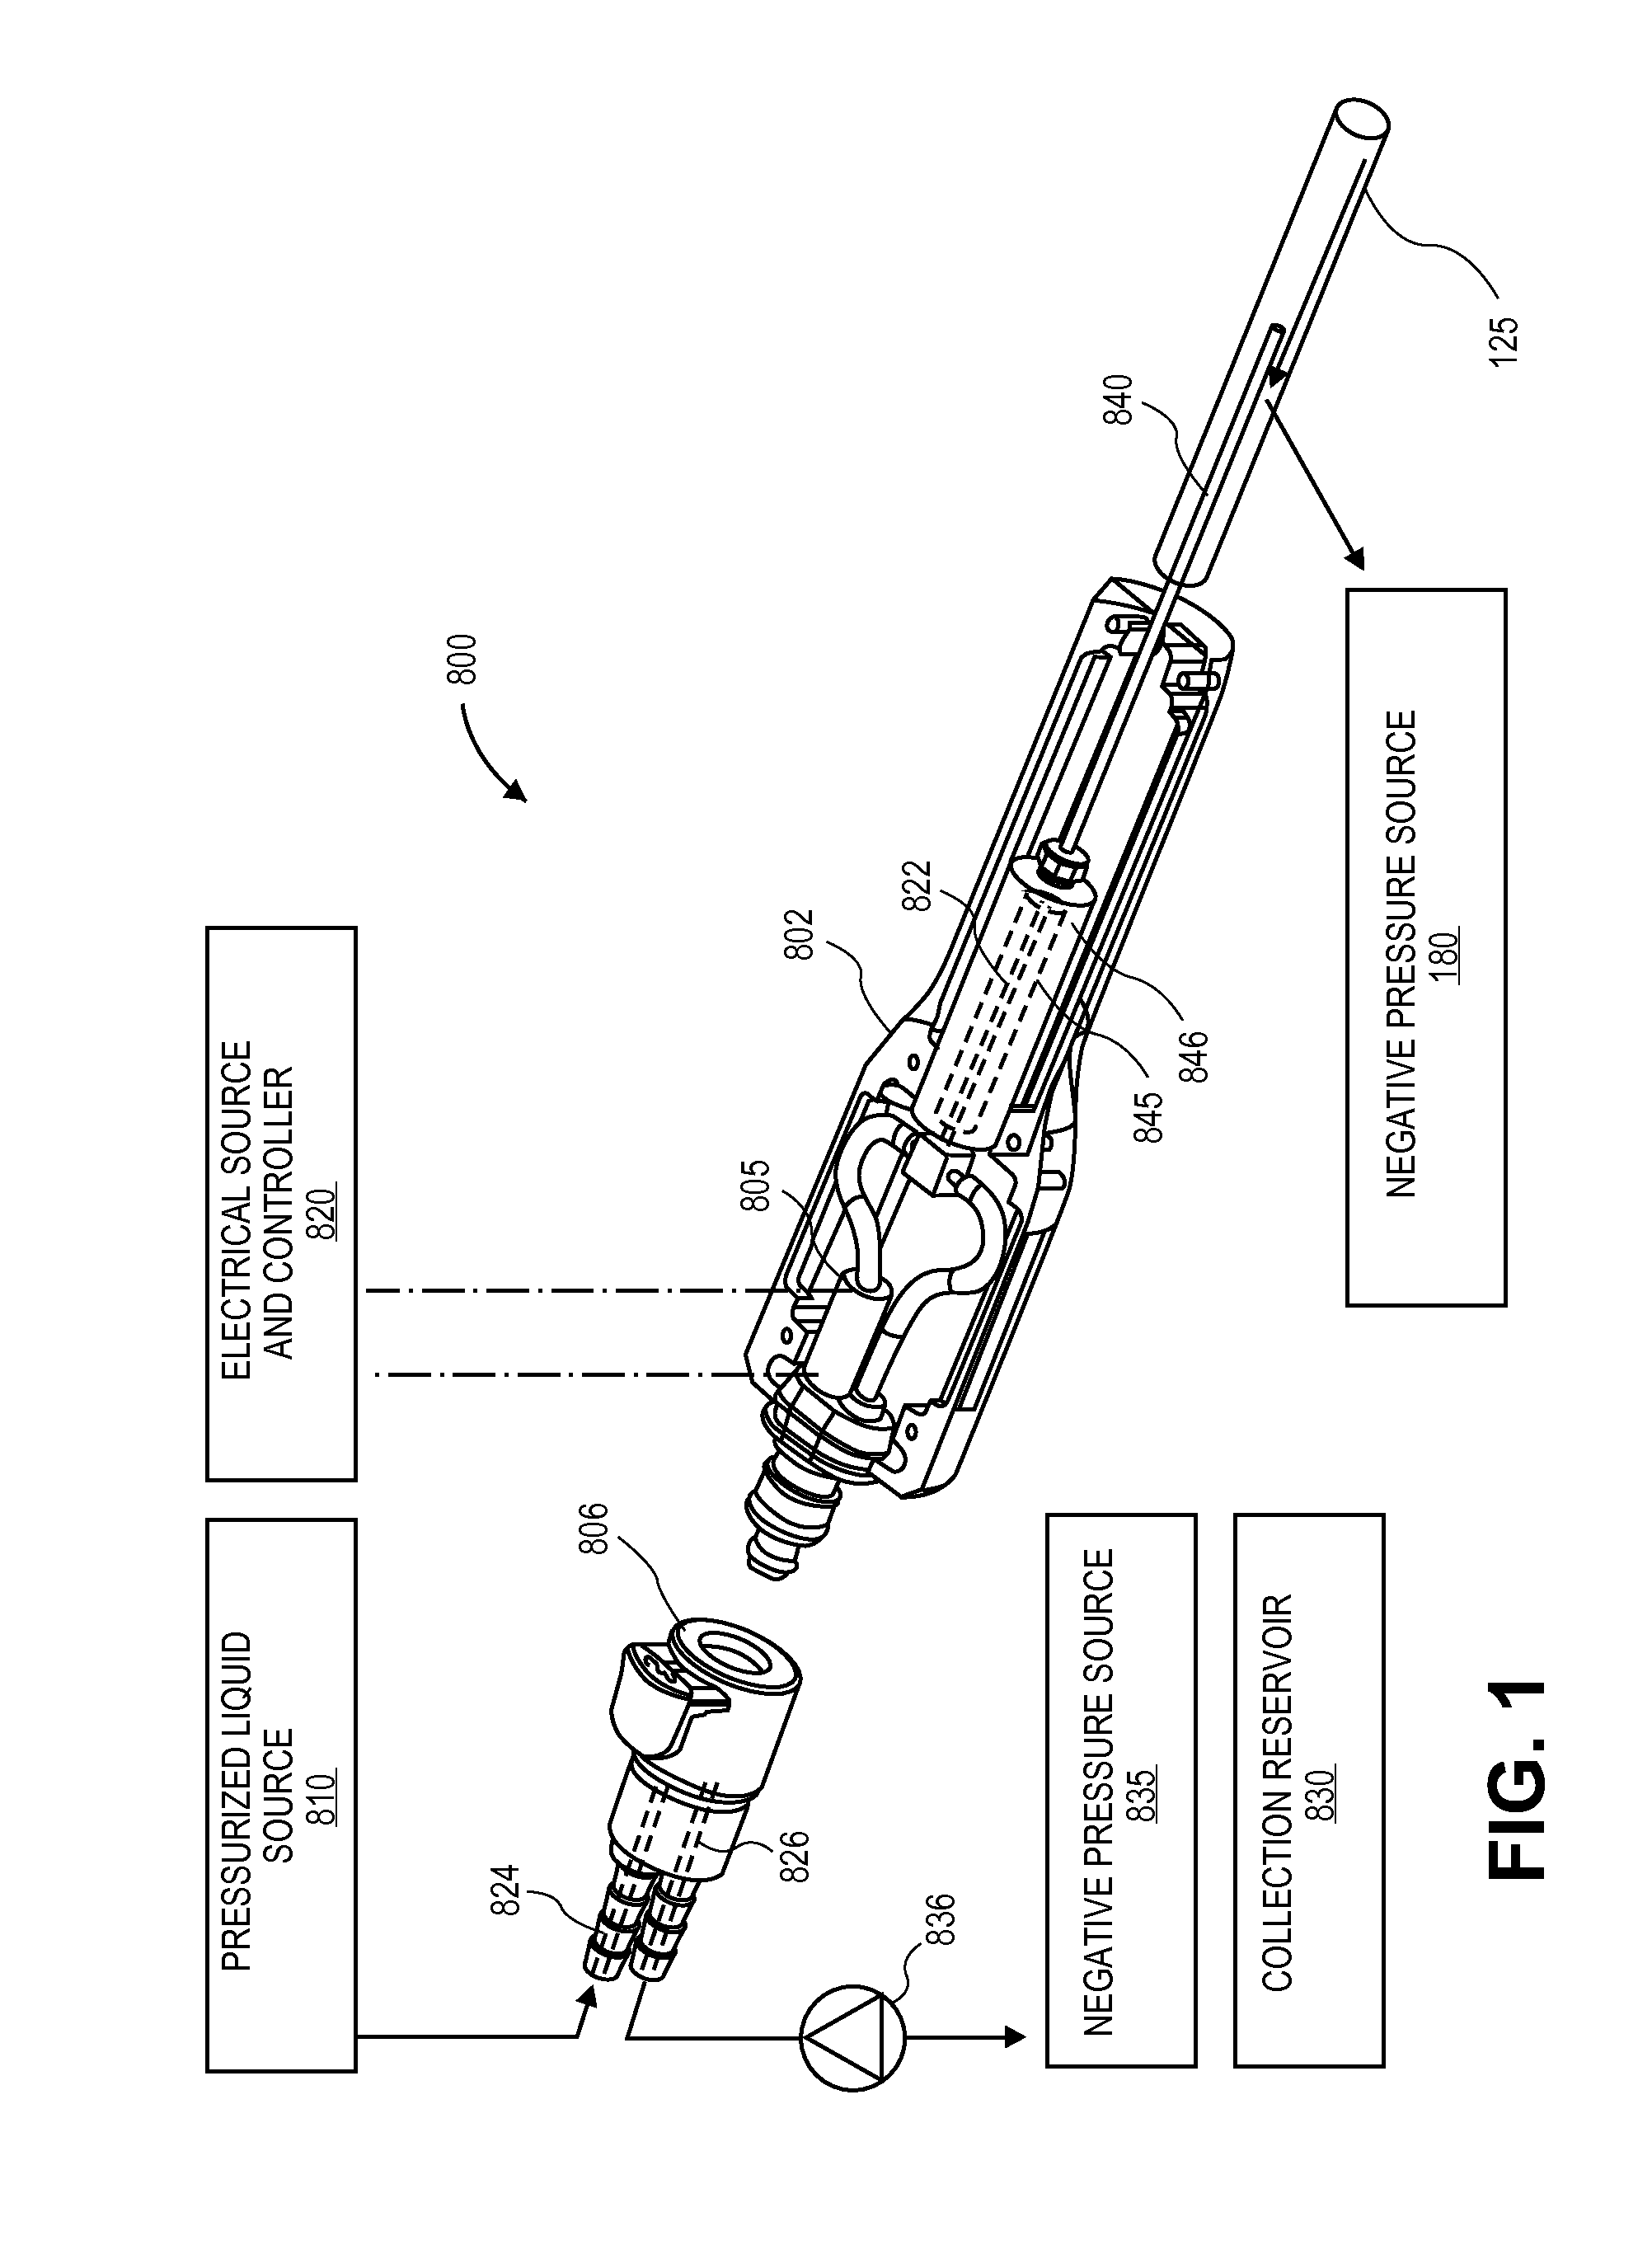 Systems and Methods for Treatment of Prostatic Tissue